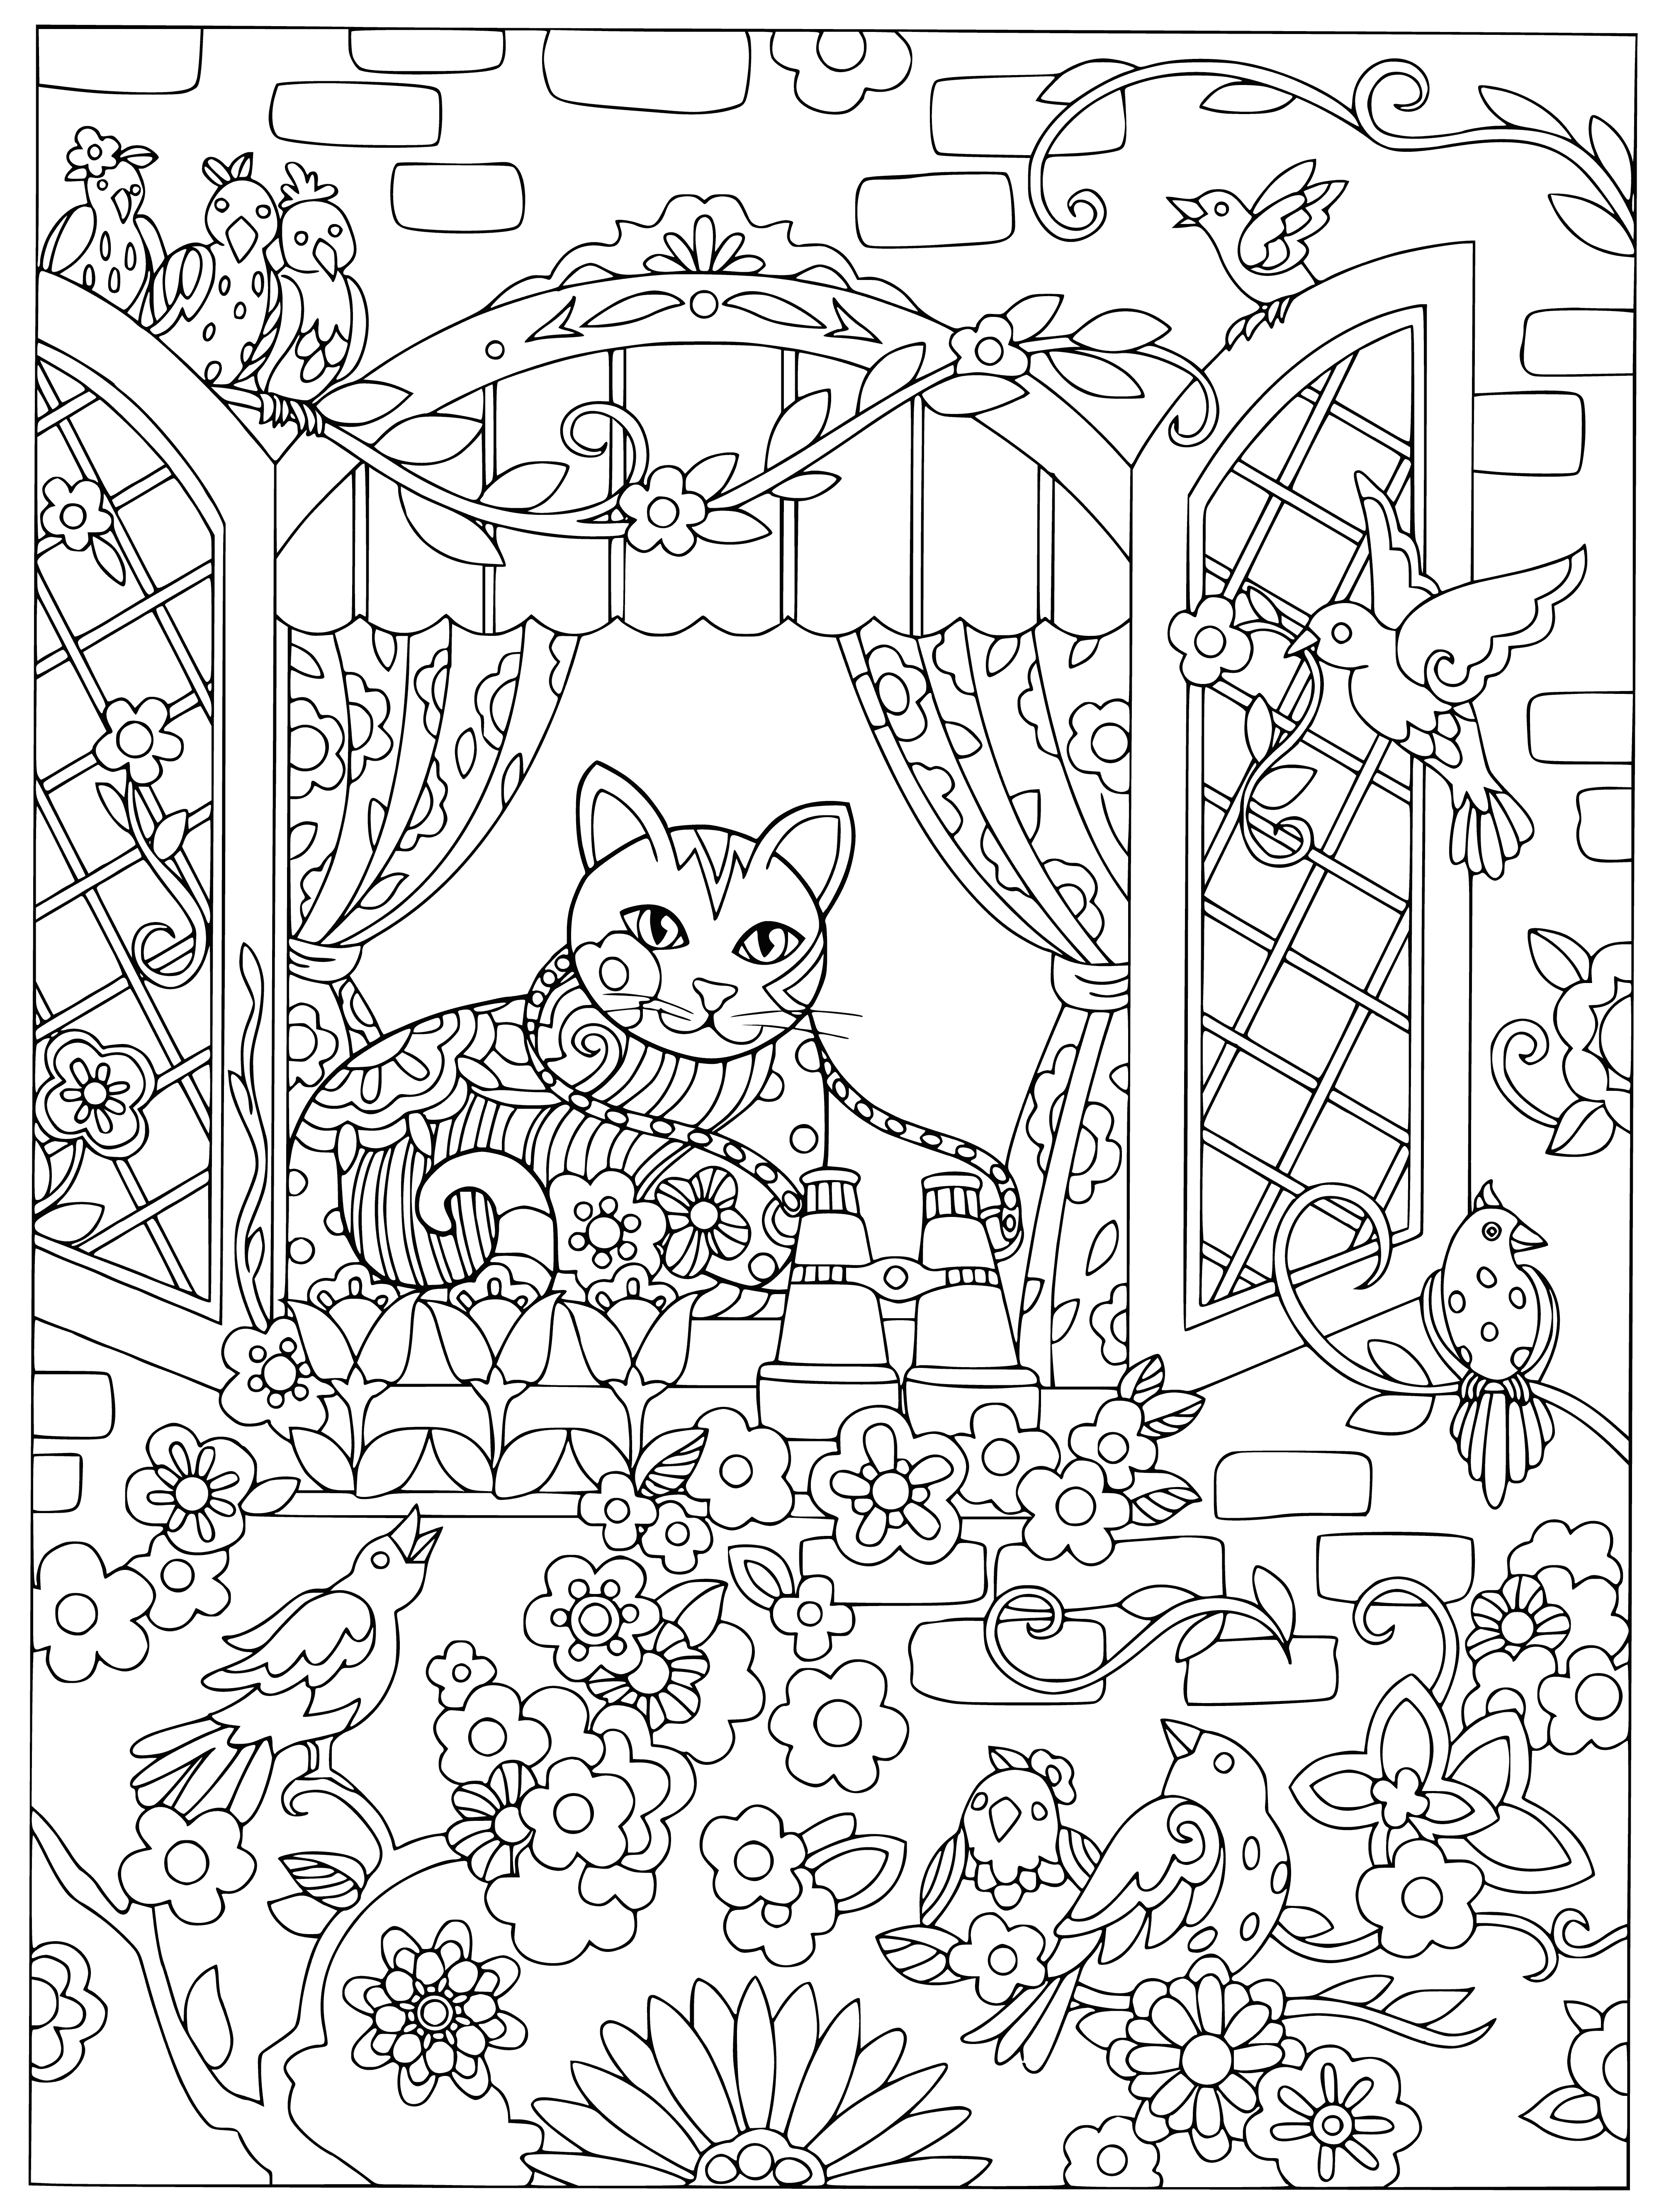 Cat in the window coloring page